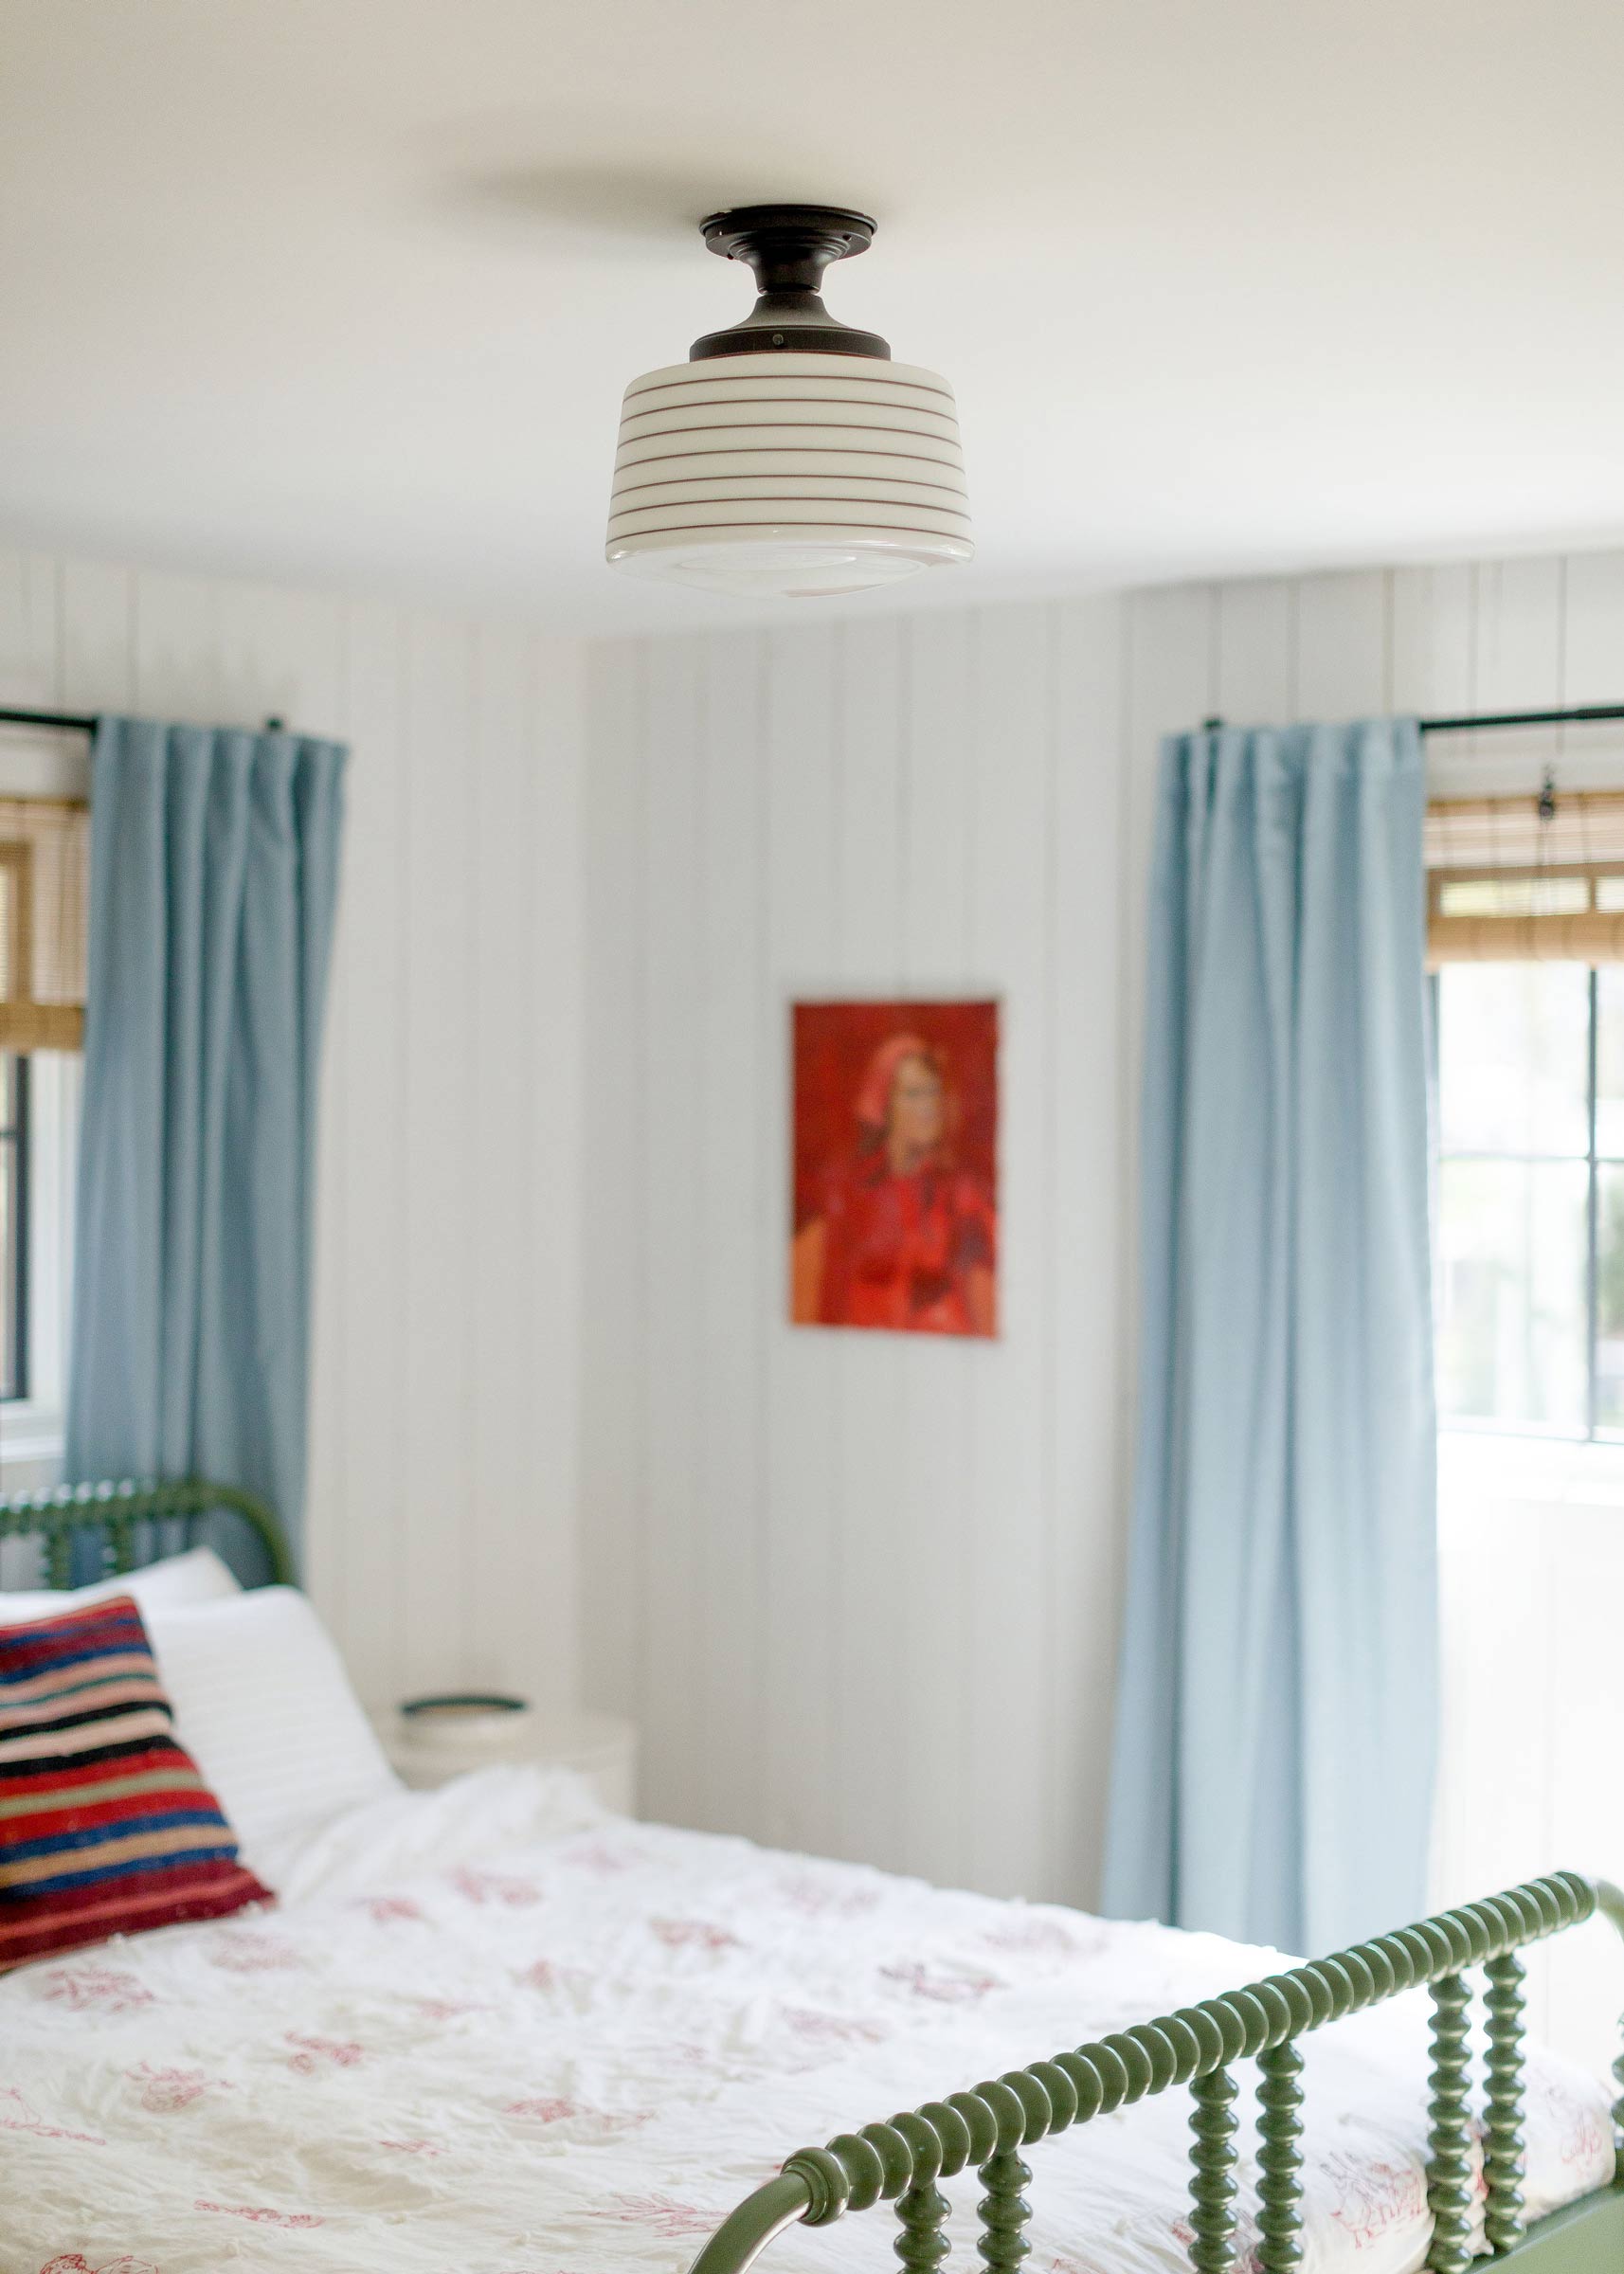 A schoolhouse-style light fixture in a modern bedroom. 